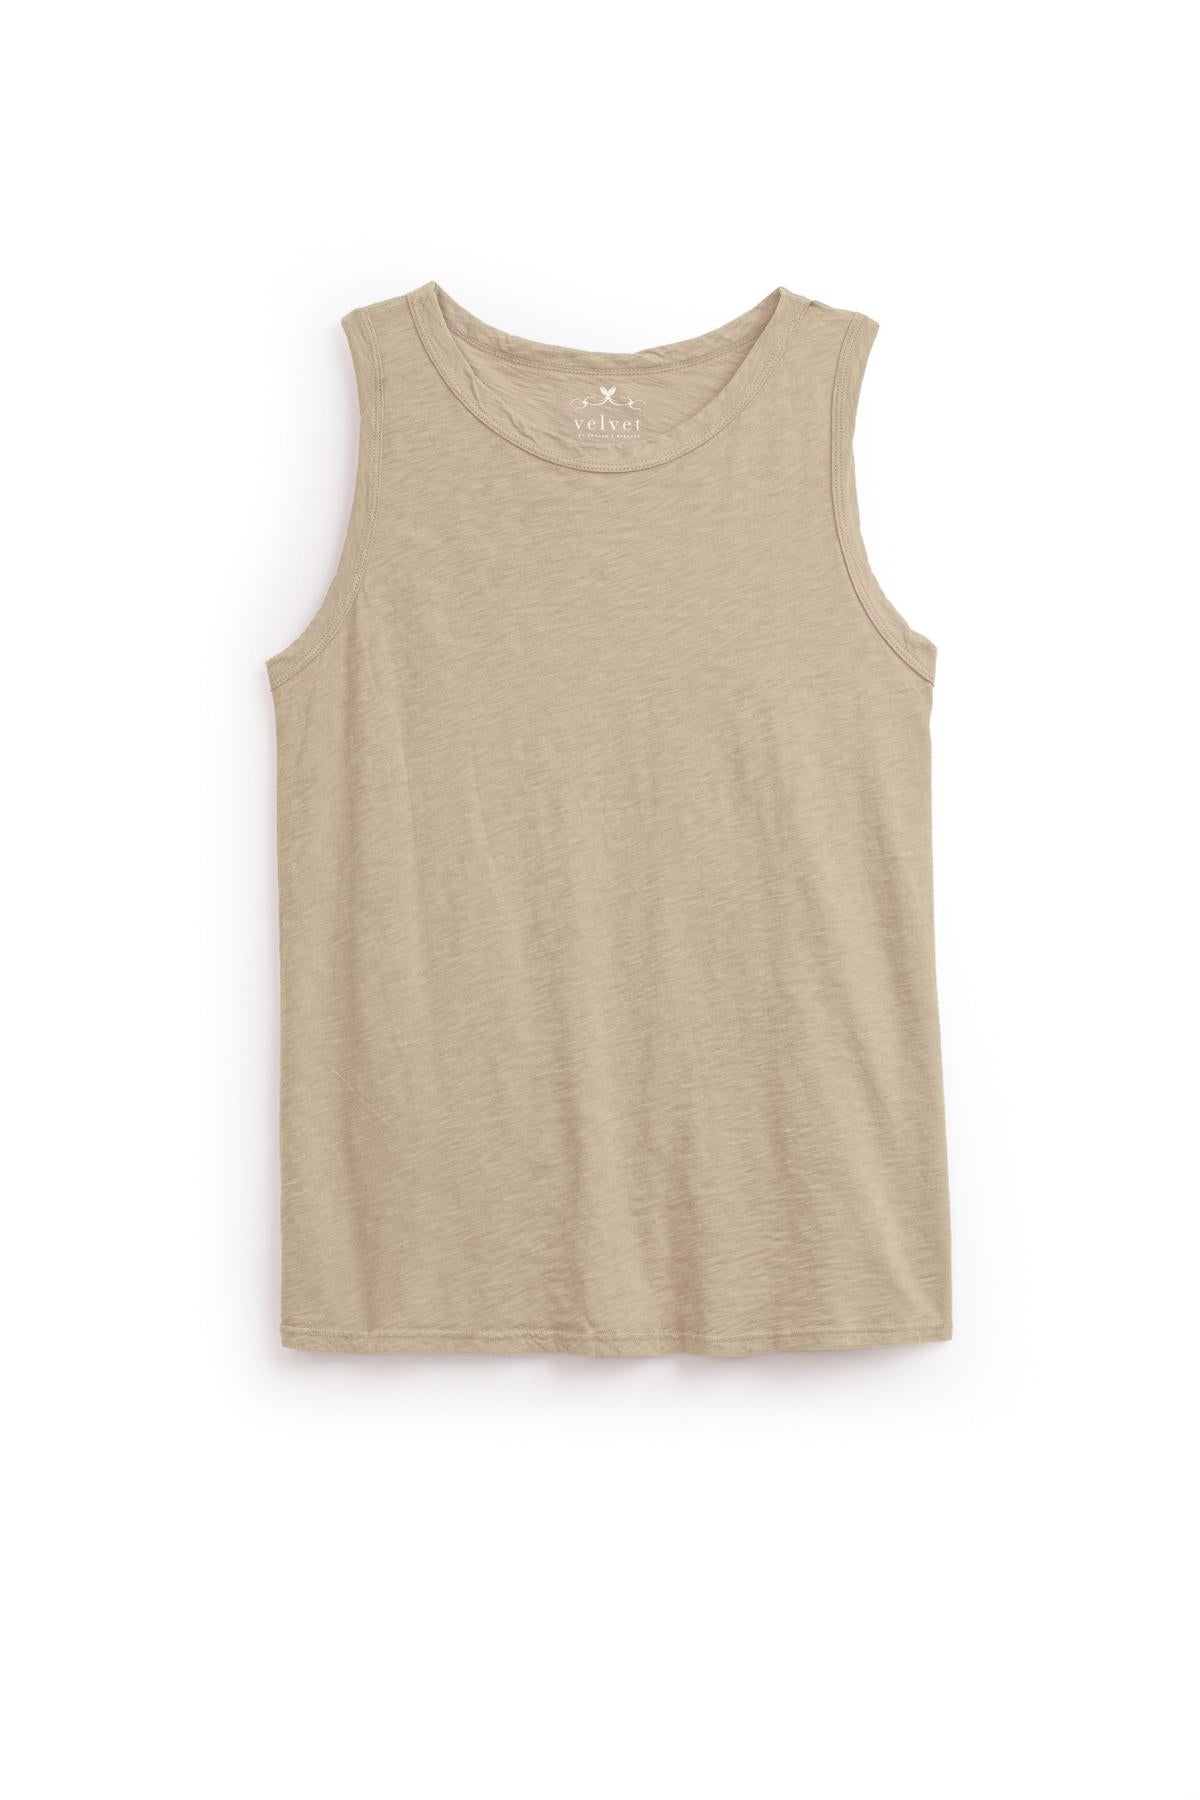 A TAURUS COTTON SLUB TANK with a crew-neck from Velvet by Graham & Spencer on a white background.-36248583831745